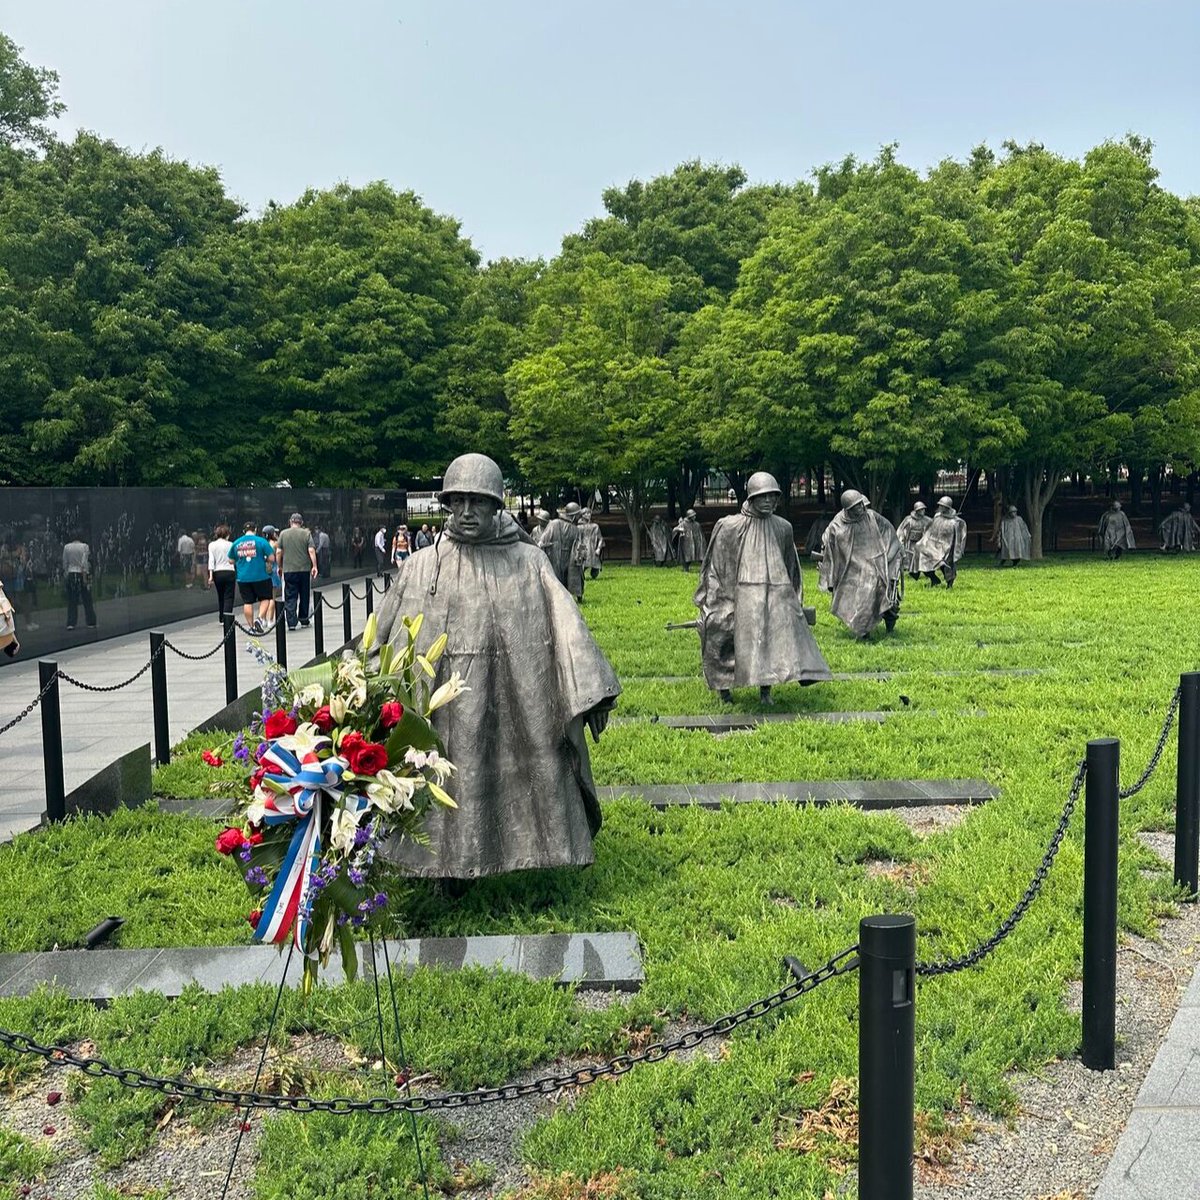 As we approach Memorial Day, OPM would like to recognize the servicemembers who have fallen in defense of our nation. We honor and thank those who made the ultimate sacrifice.